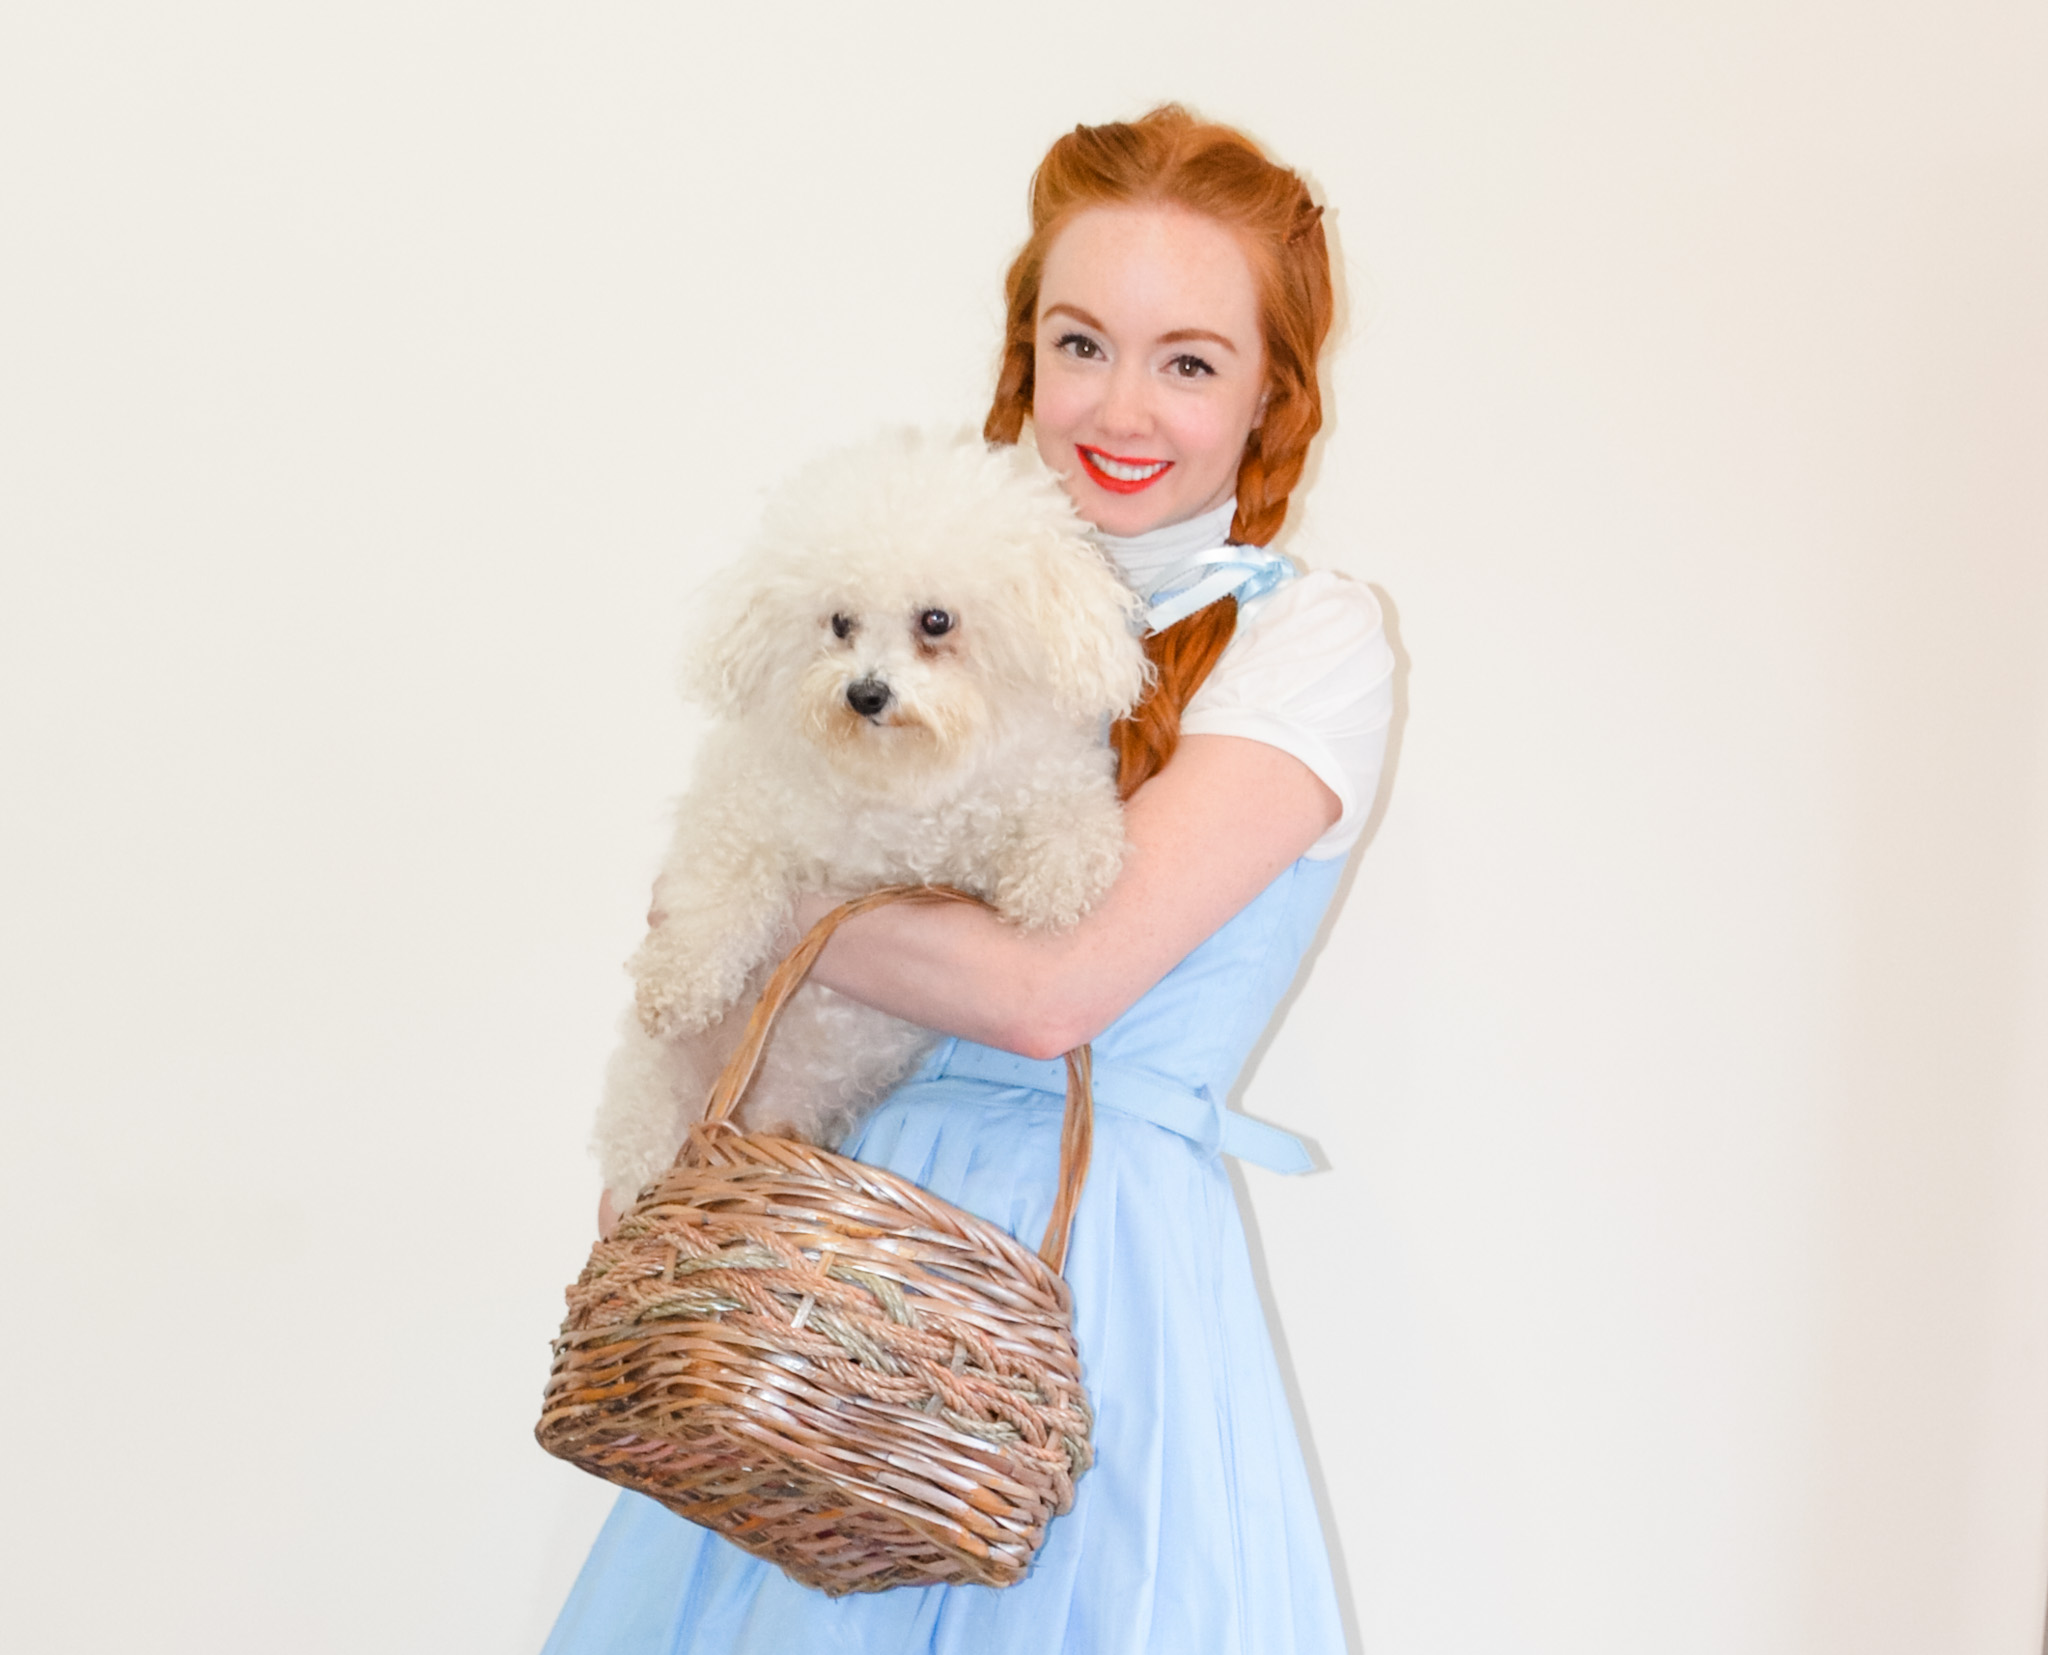 Dorothy and Toto from The Wizard of Oz - easy fancy dress idea for Halloween